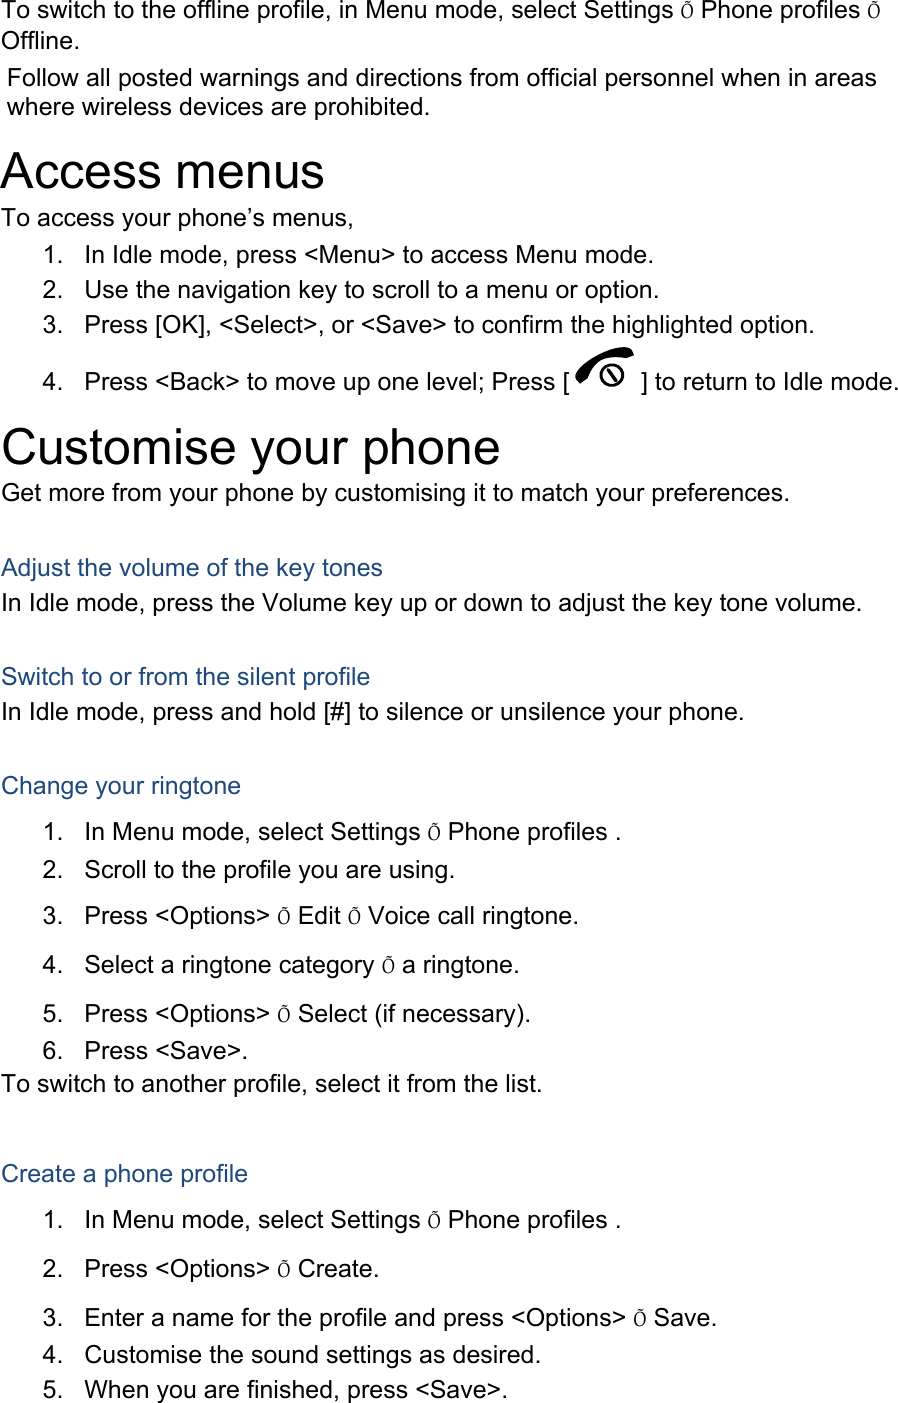 To switch to the offline profile, in Menu mode, select Settings Õ Phone profiles Õ Offline. Follow all posted warnings and directions from official personnel when in areas where wireless devices are prohibited. Access menus To access your phone’s menus, 1.  In Idle mode, press &lt;Menu&gt; to access Menu mode. 2.  Use the navigation key to scroll to a menu or option. 3.  Press [OK], &lt;Select&gt;, or &lt;Save&gt; to confirm the highlighted option. 4.  Press &lt;Back&gt; to move up one level; Press [ ] to return to Idle mode. Customise your phone Get more from your phone by customising it to match your preferences.  Adjust the volume of the key tones In Idle mode, press the Volume key up or down to adjust the key tone volume.  Switch to or from the silent profile In Idle mode, press and hold [#] to silence or unsilence your phone.  Change your ringtone 1.  In Menu mode, select Settings Õ Phone profiles . 2.  Scroll to the profile you are using. 3. Press &lt;Options&gt; Õ Edit Õ Voice call ringtone. 4.  Select a ringtone category Õ a ringtone. 5. Press &lt;Options&gt; Õ Select (if necessary). 6. Press &lt;Save&gt;. To switch to another profile, select it from the list.  Create a phone profile 1.  In Menu mode, select Settings Õ Phone profiles . 2. Press &lt;Options&gt; Õ Create. 3.  Enter a name for the profile and press &lt;Options&gt; Õ Save. 4.  Customise the sound settings as desired. 5.  When you are finished, press &lt;Save&gt;. 